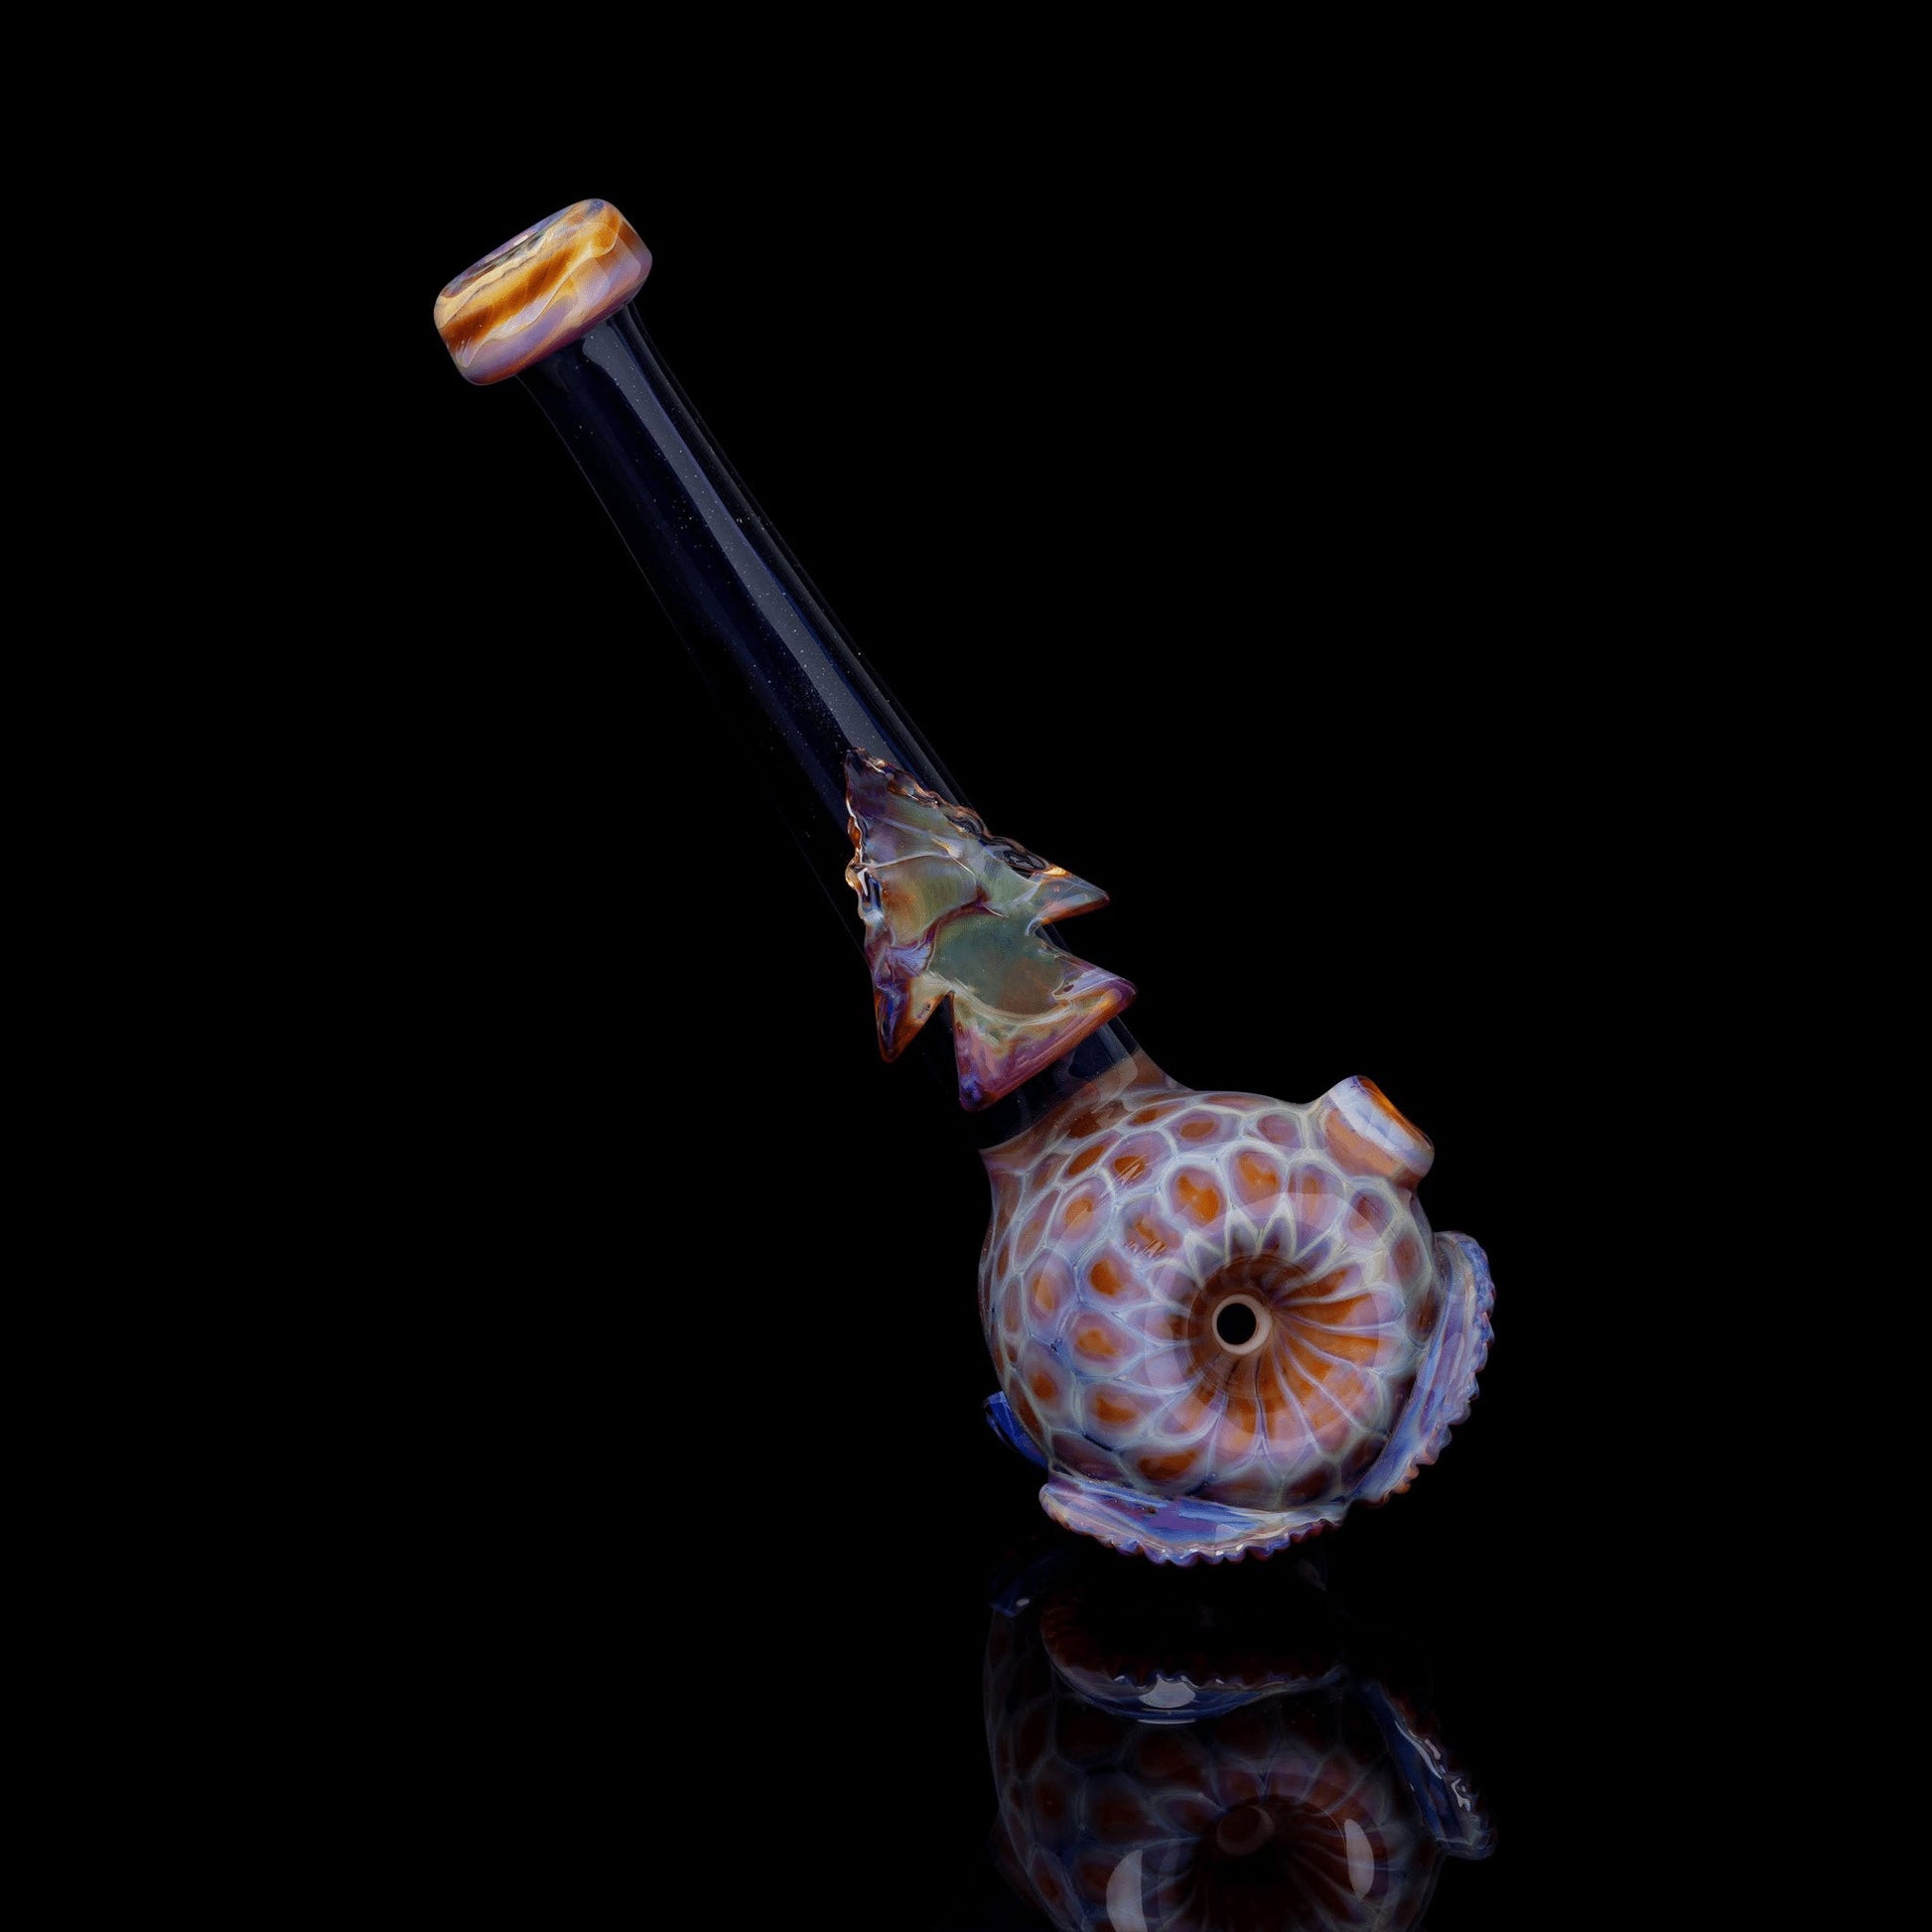 innovative design of the Owl Dry Pipe by Elks That Run x Nathan Belmont (Belmont's Beasts)